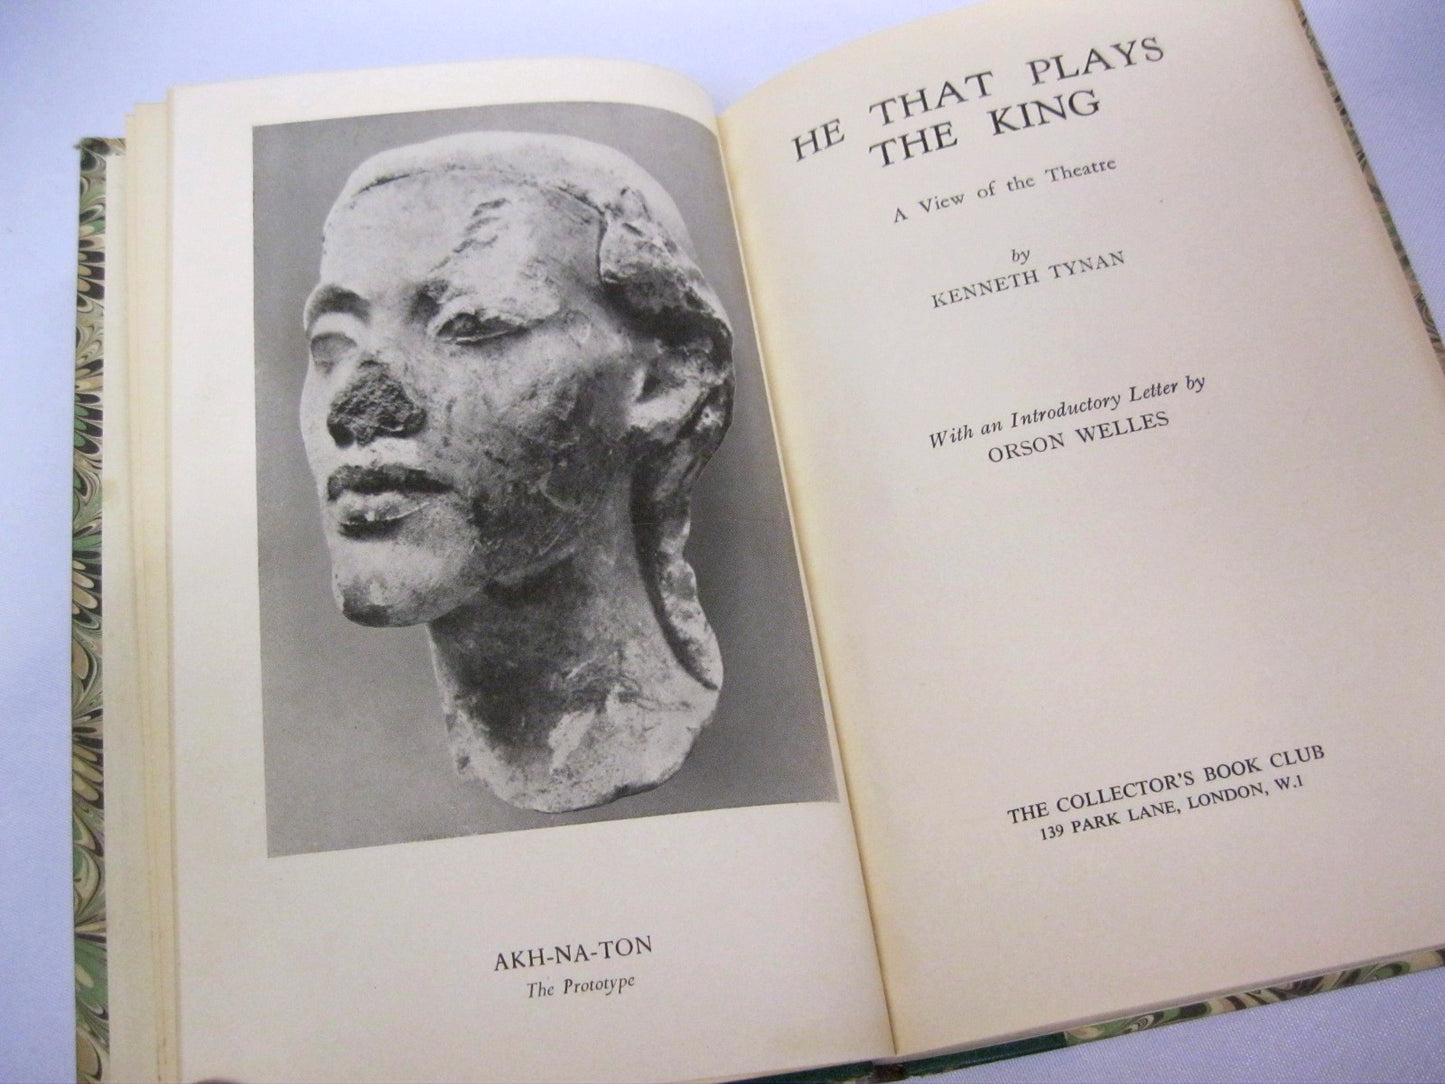 He That Plays the King by Kenneth Tynan